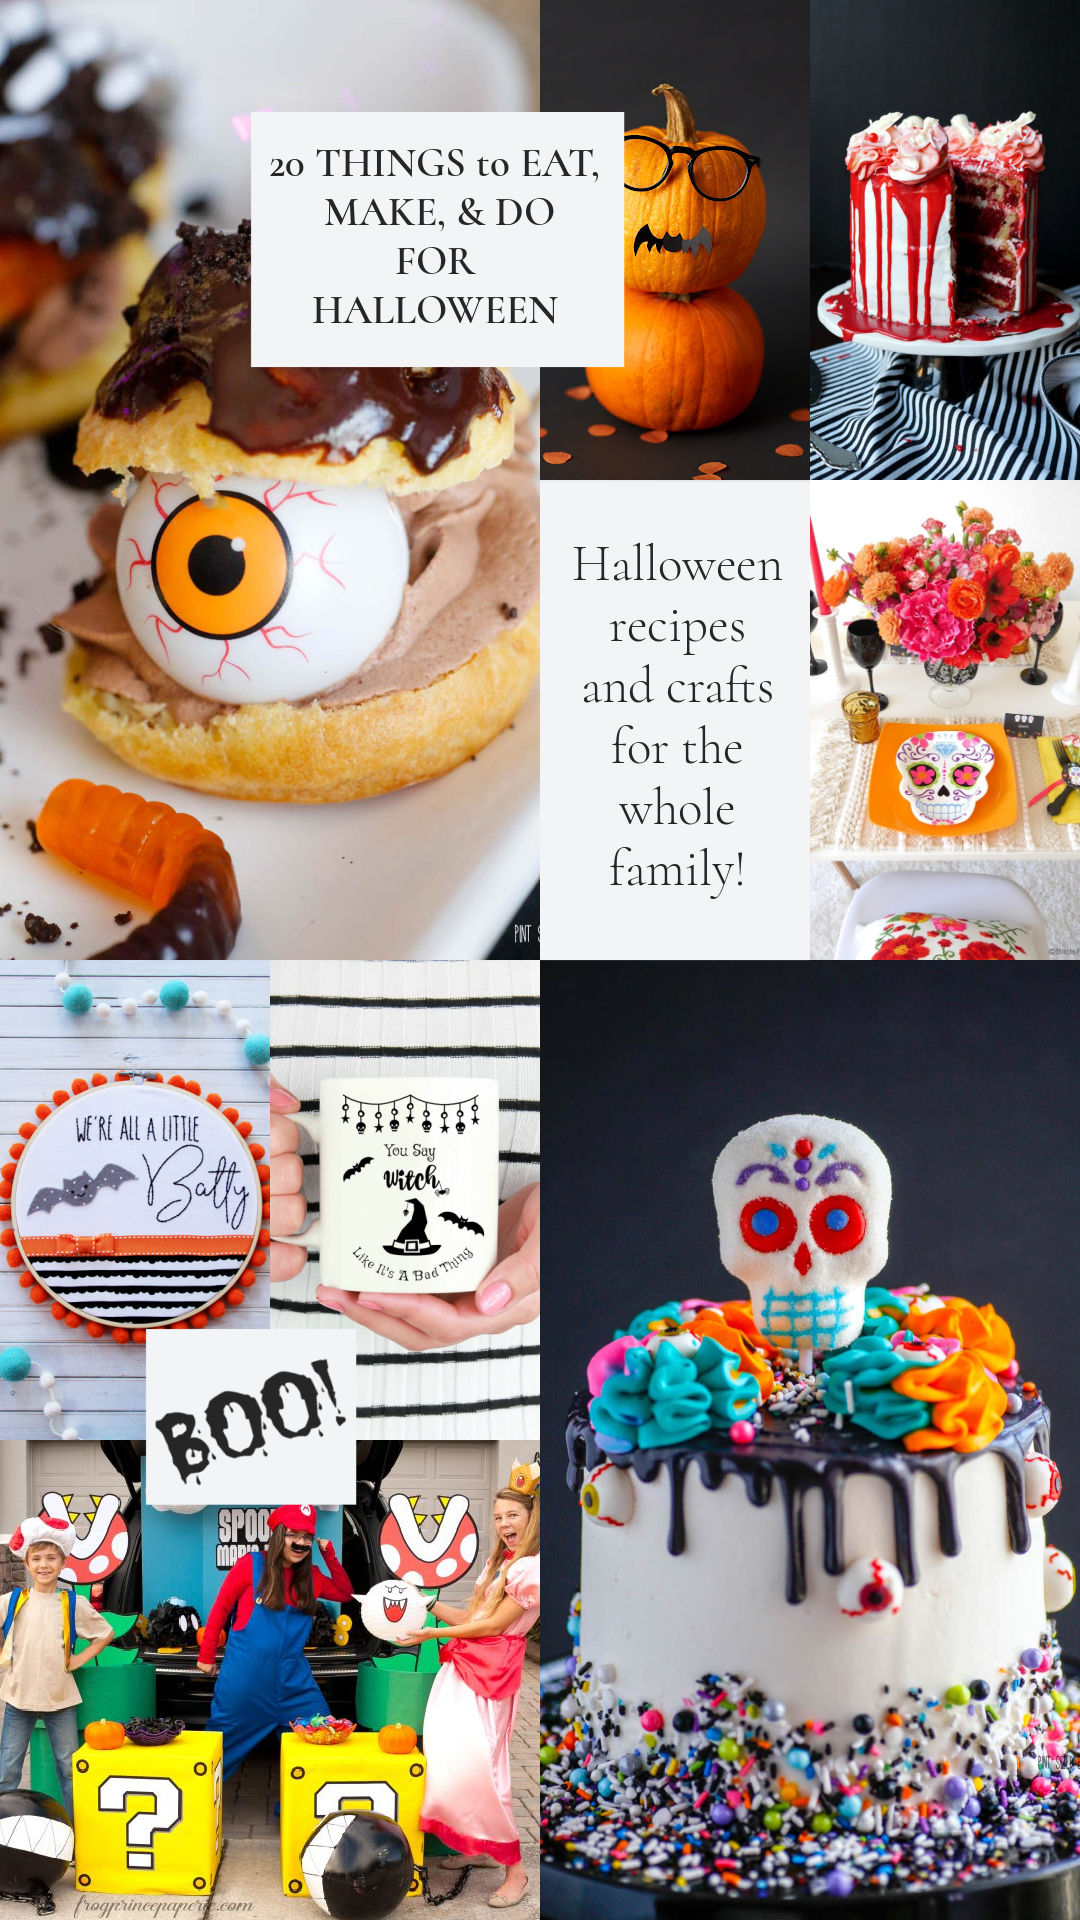 If you are at a lost for creative ideas for a night of Trick-or-Treating? Here are 20 Things to Eat, Make and Do this Halloween night.